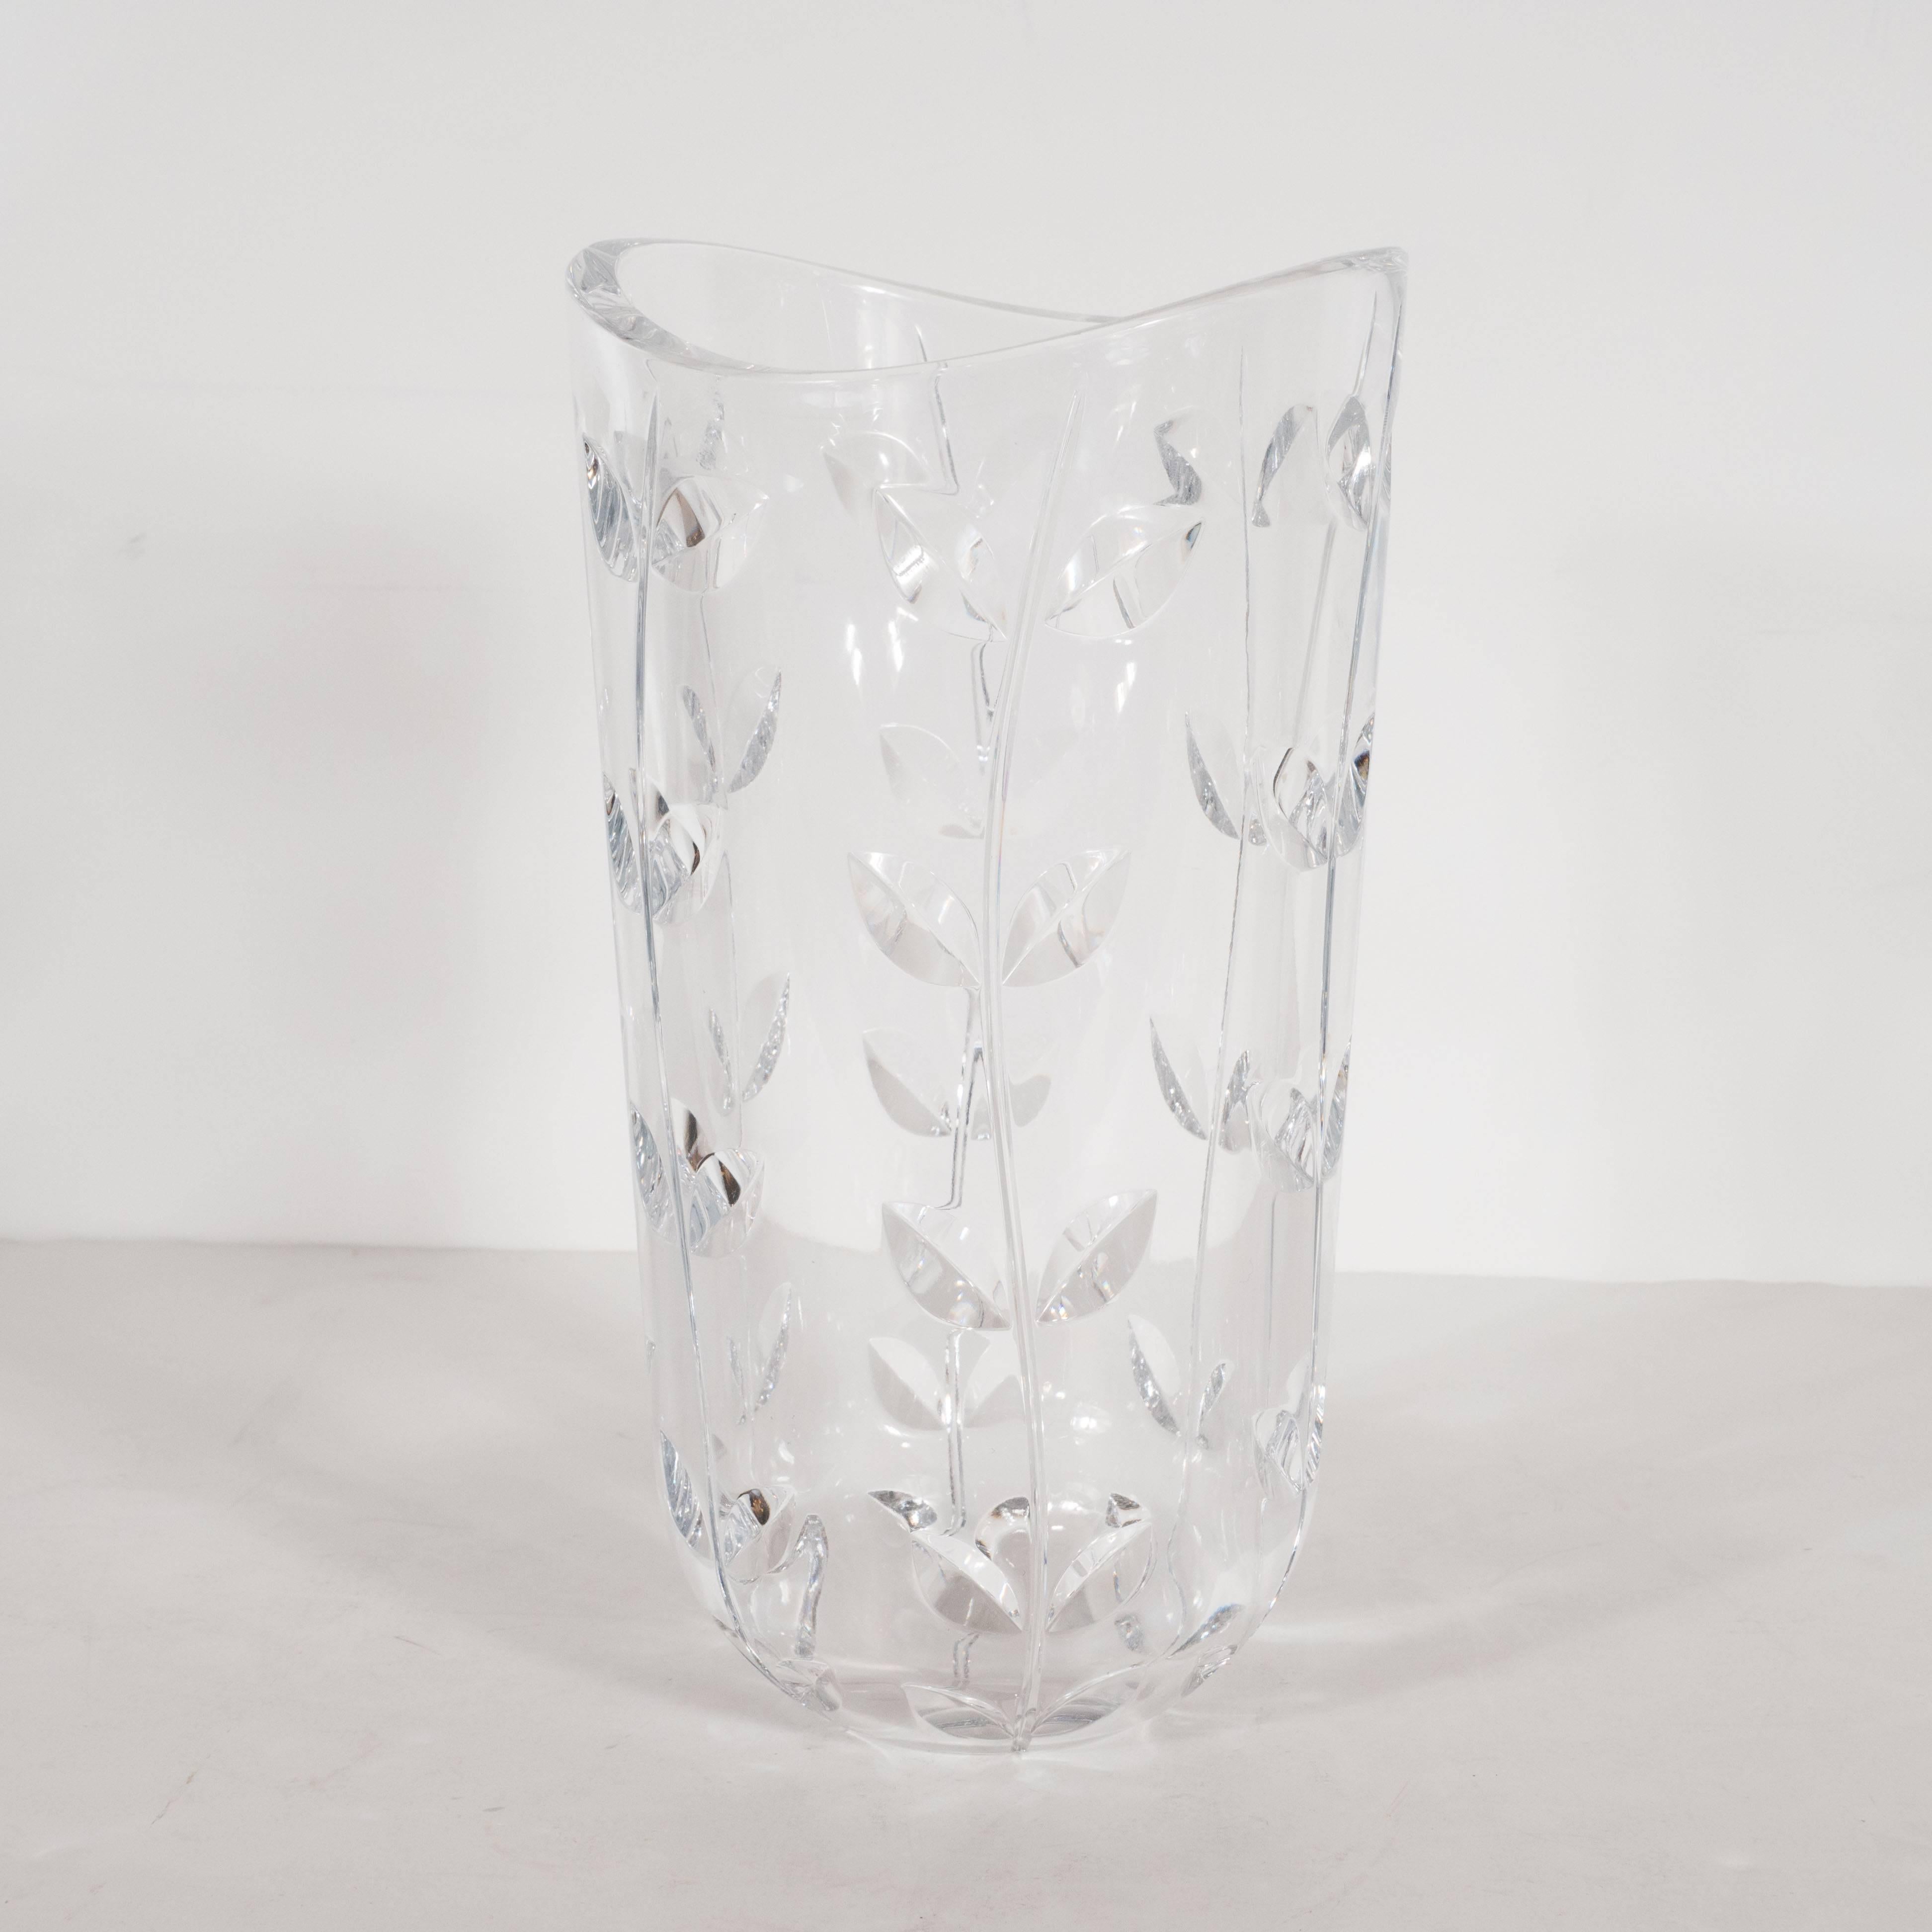 This gorgeous crystal vase was realized by Tiffany & Co. America's premiere luxury goods purveyor, specializing in sterling silver and crystal- since 1837. It features an organically sculpted top with undulating curves and foliate patterns